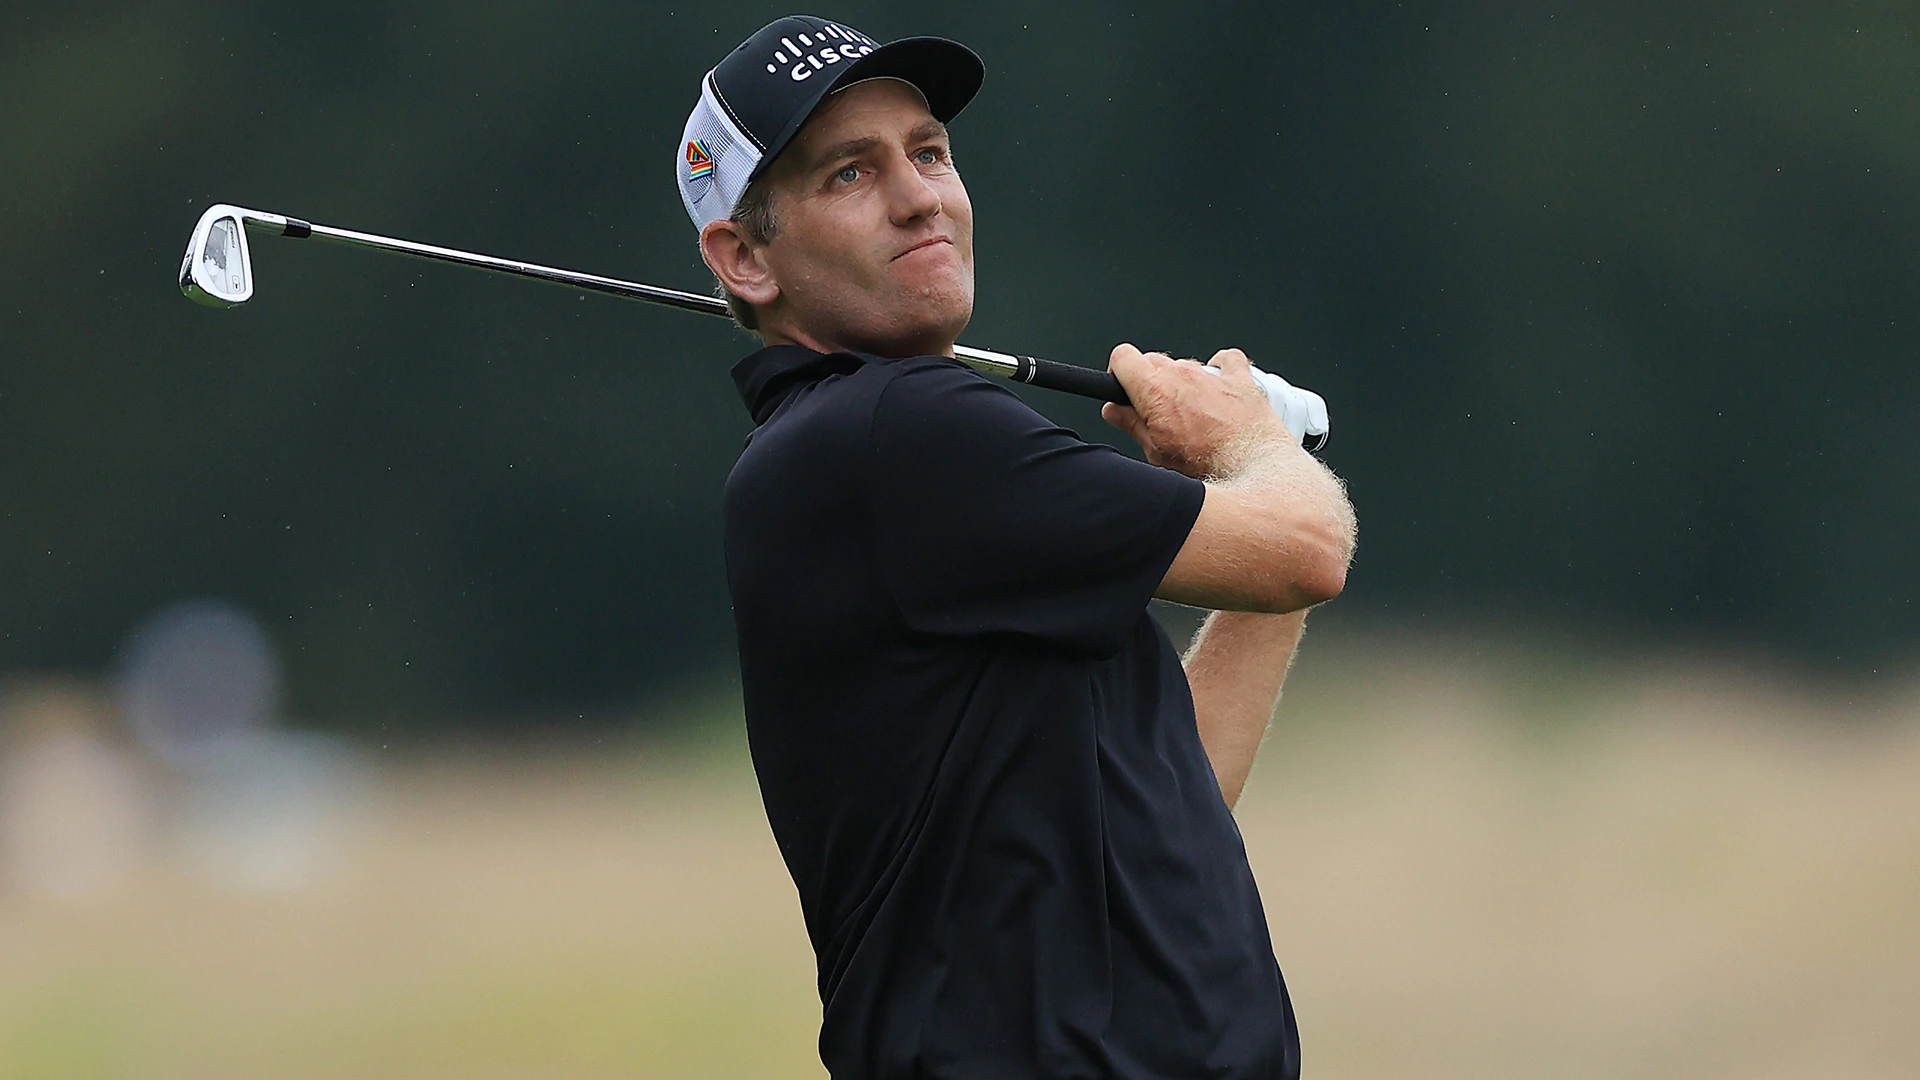 Brendon Todd (69) maintains lead at WGC-FedEx St. Jude Invitational